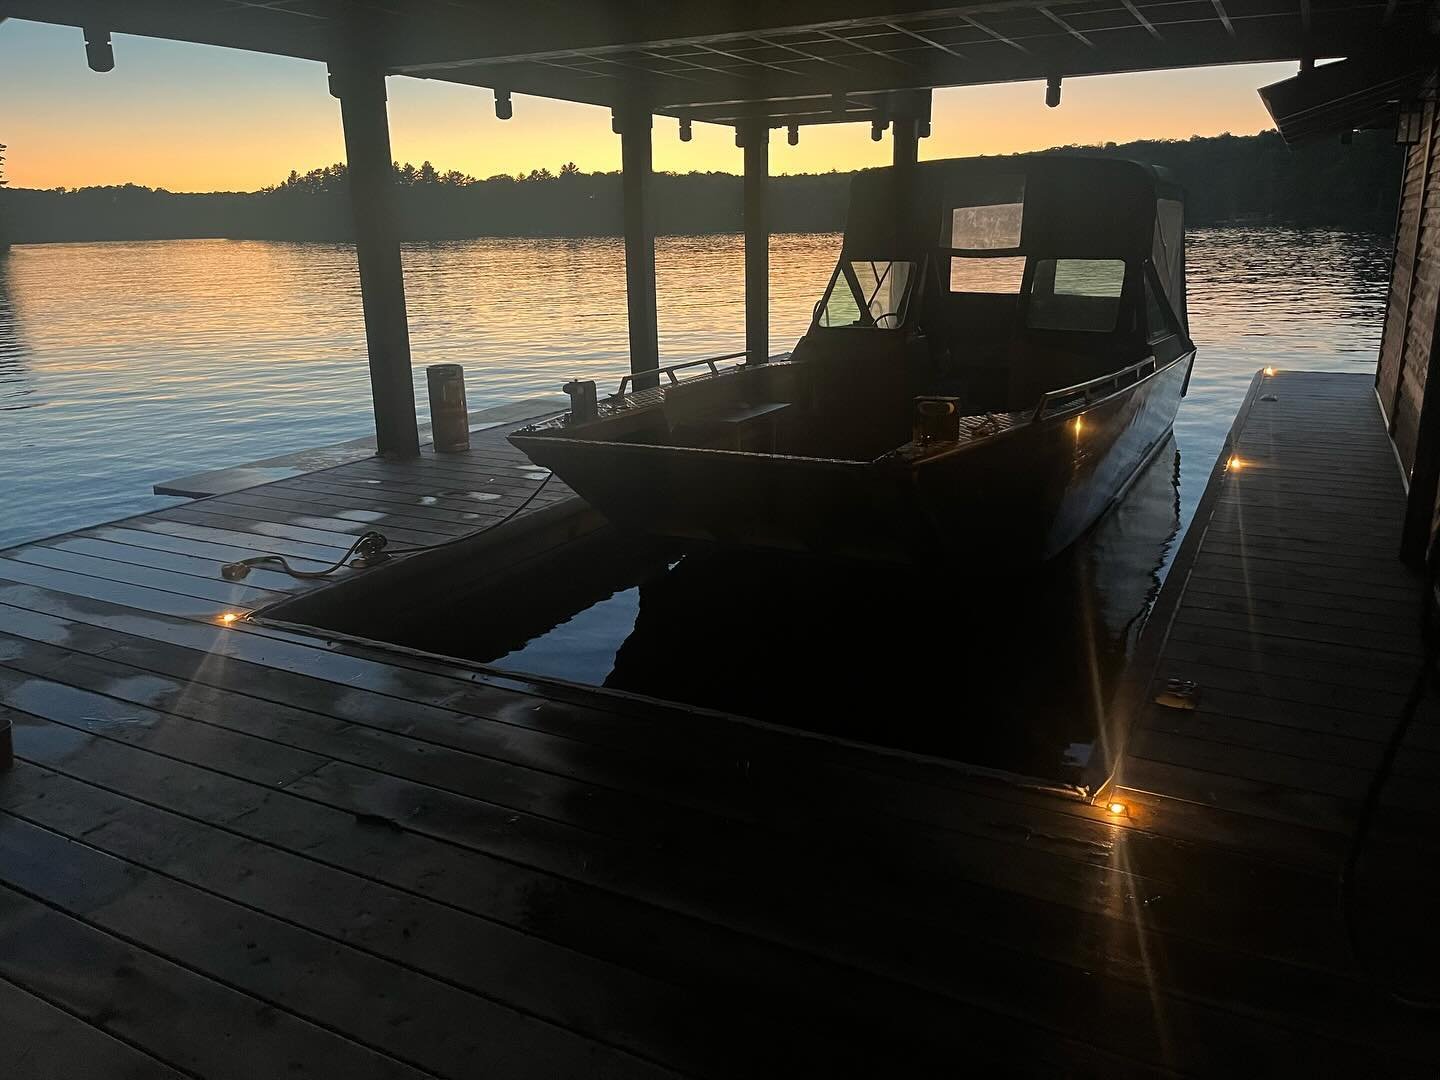 There&rsquo;s nothing quite like the tranquil beauty of Lake Rosseau at sunset. 🌄 This boat slip, now illuminated with Brilliance Versa Beams, is both a sight to behold and a beacon of safety. These modern yet discreet lights blend seamlessly into t